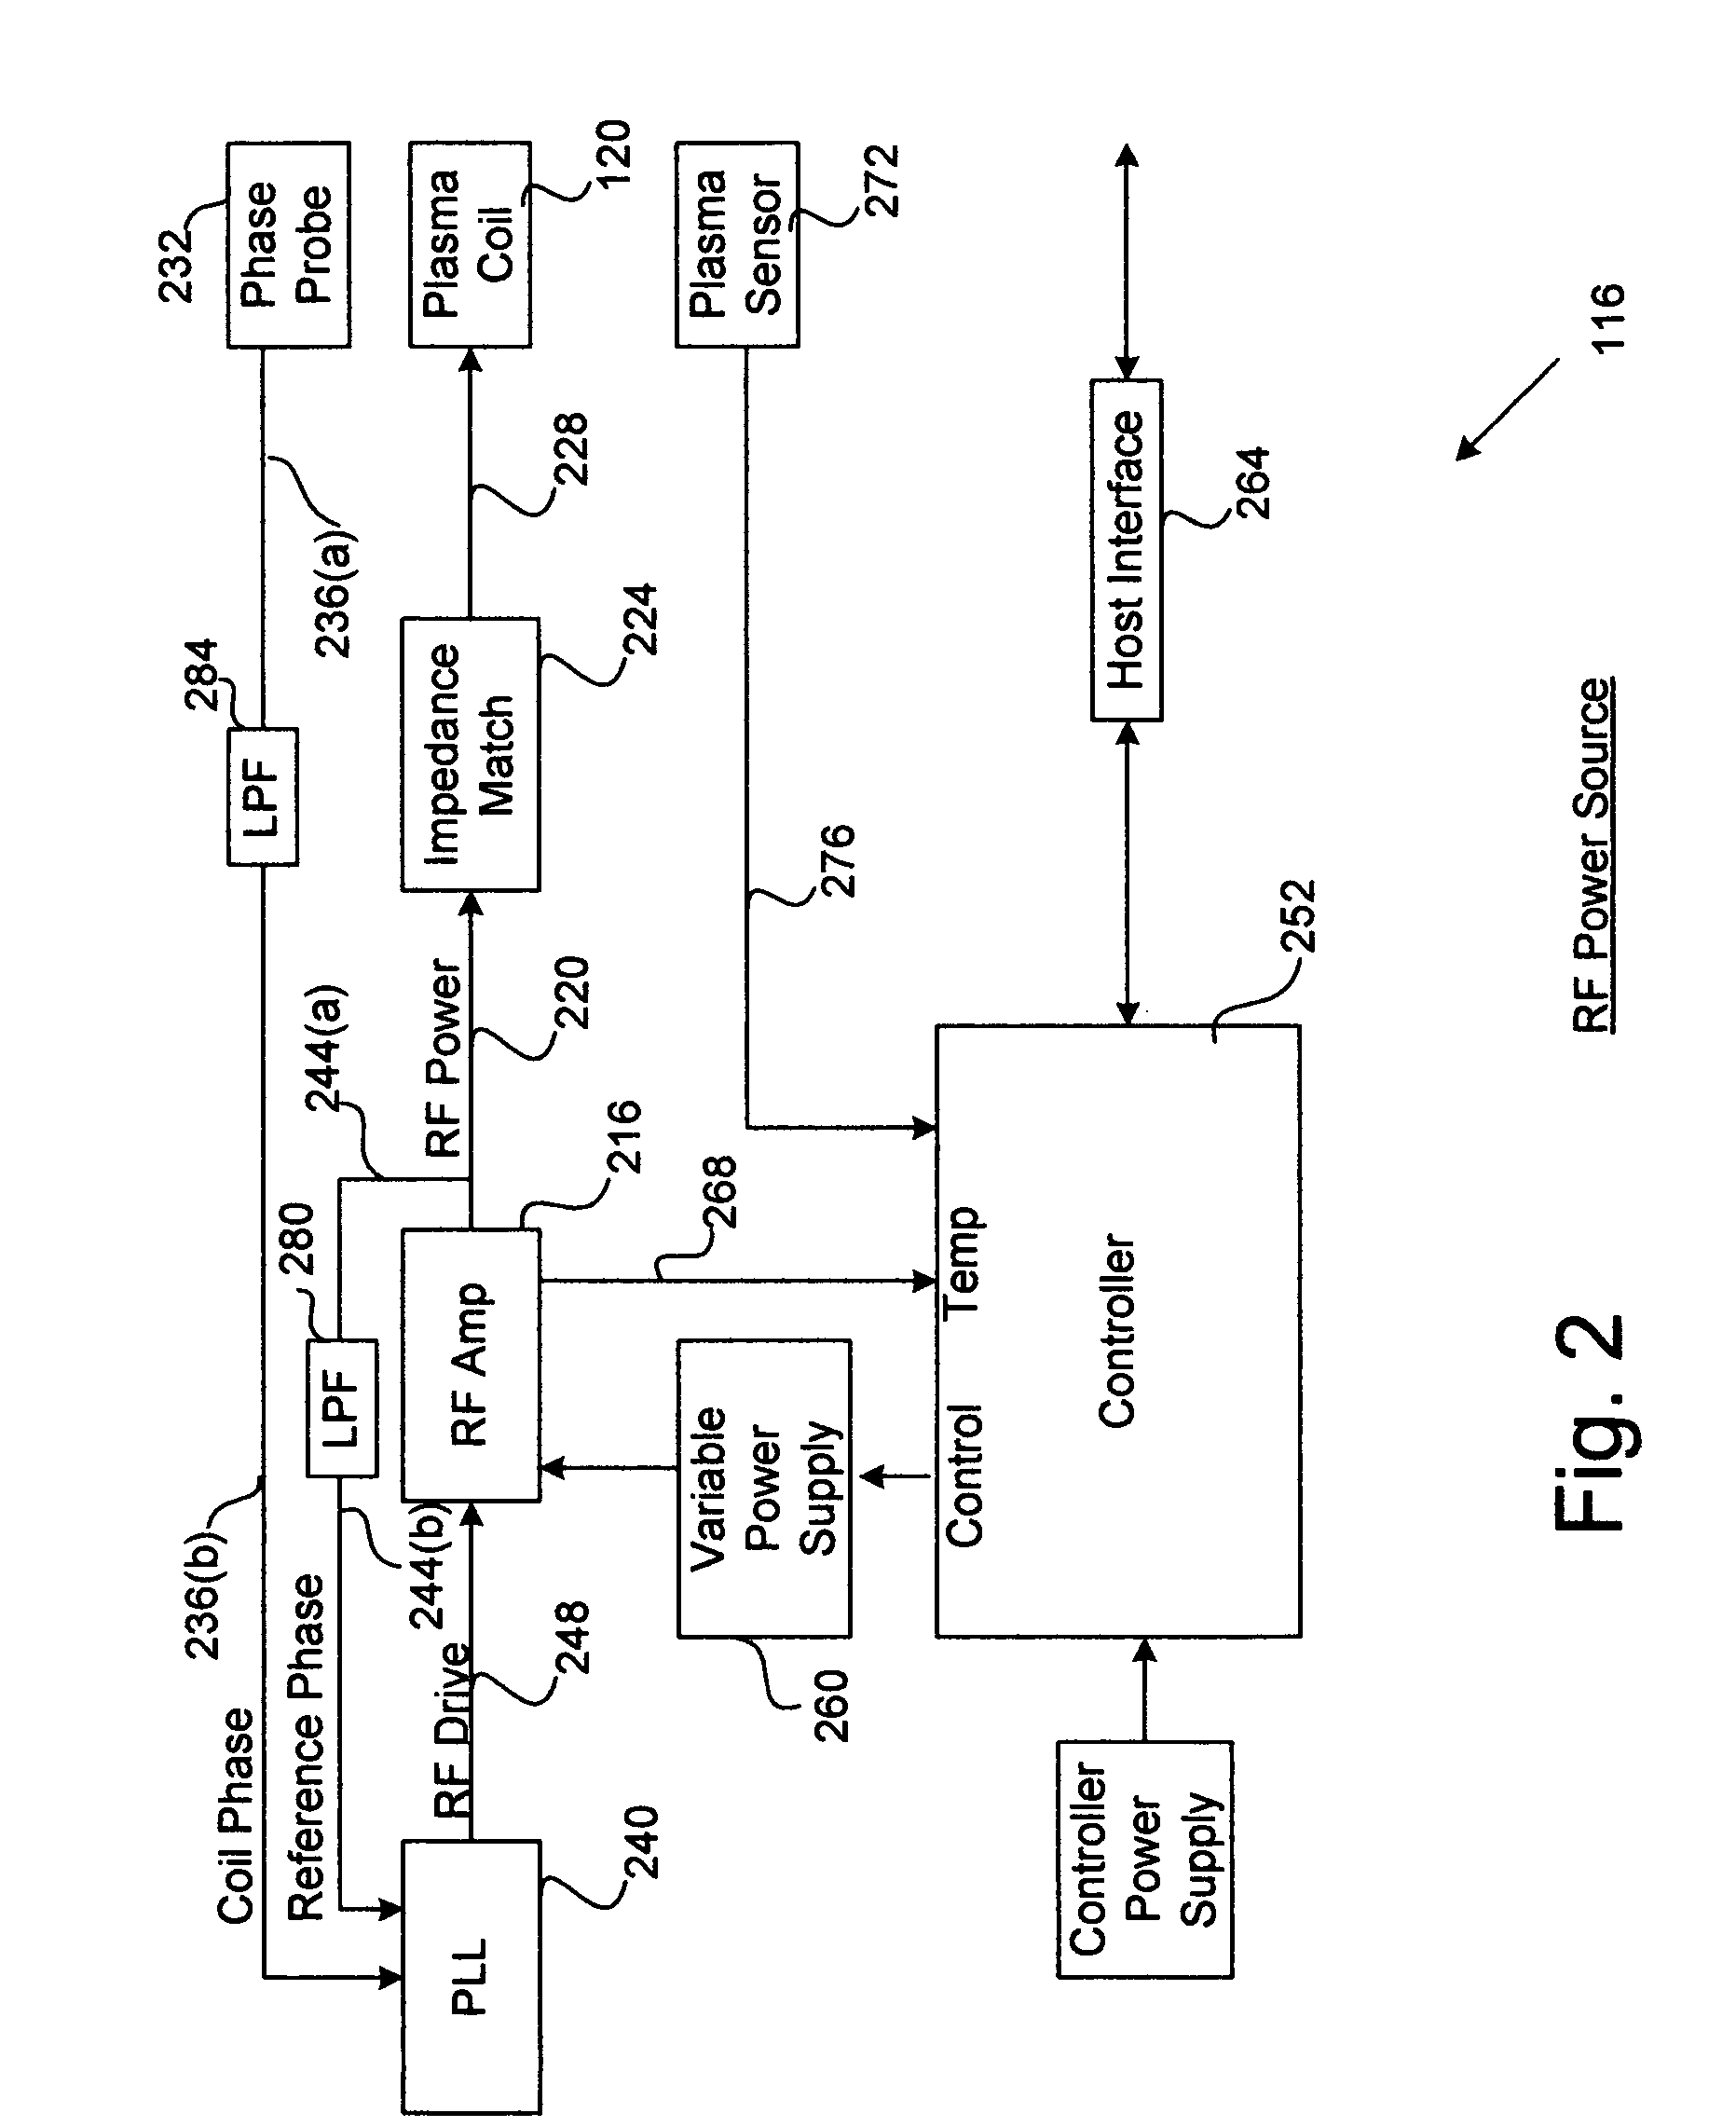 Inductively-coupled RF power source